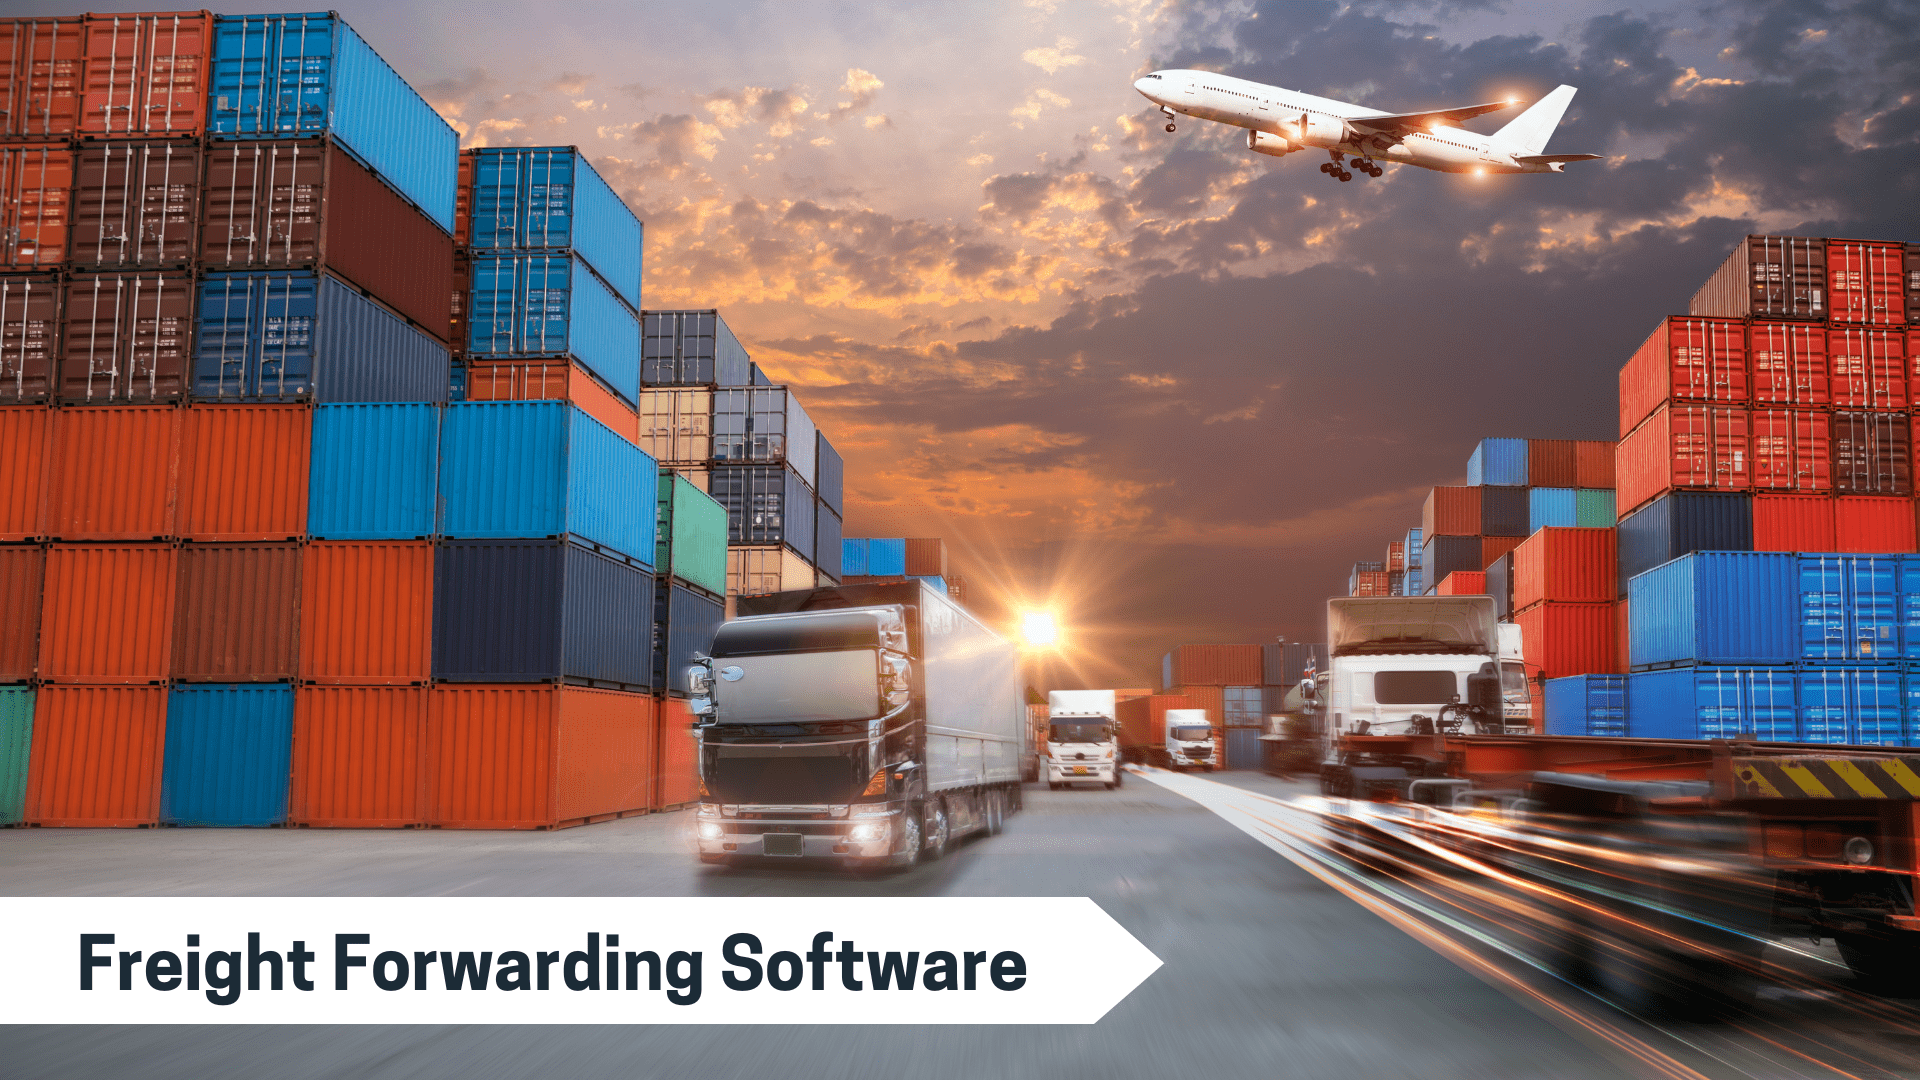 How to Streamline Freight Forwarding Process with Freight Software?